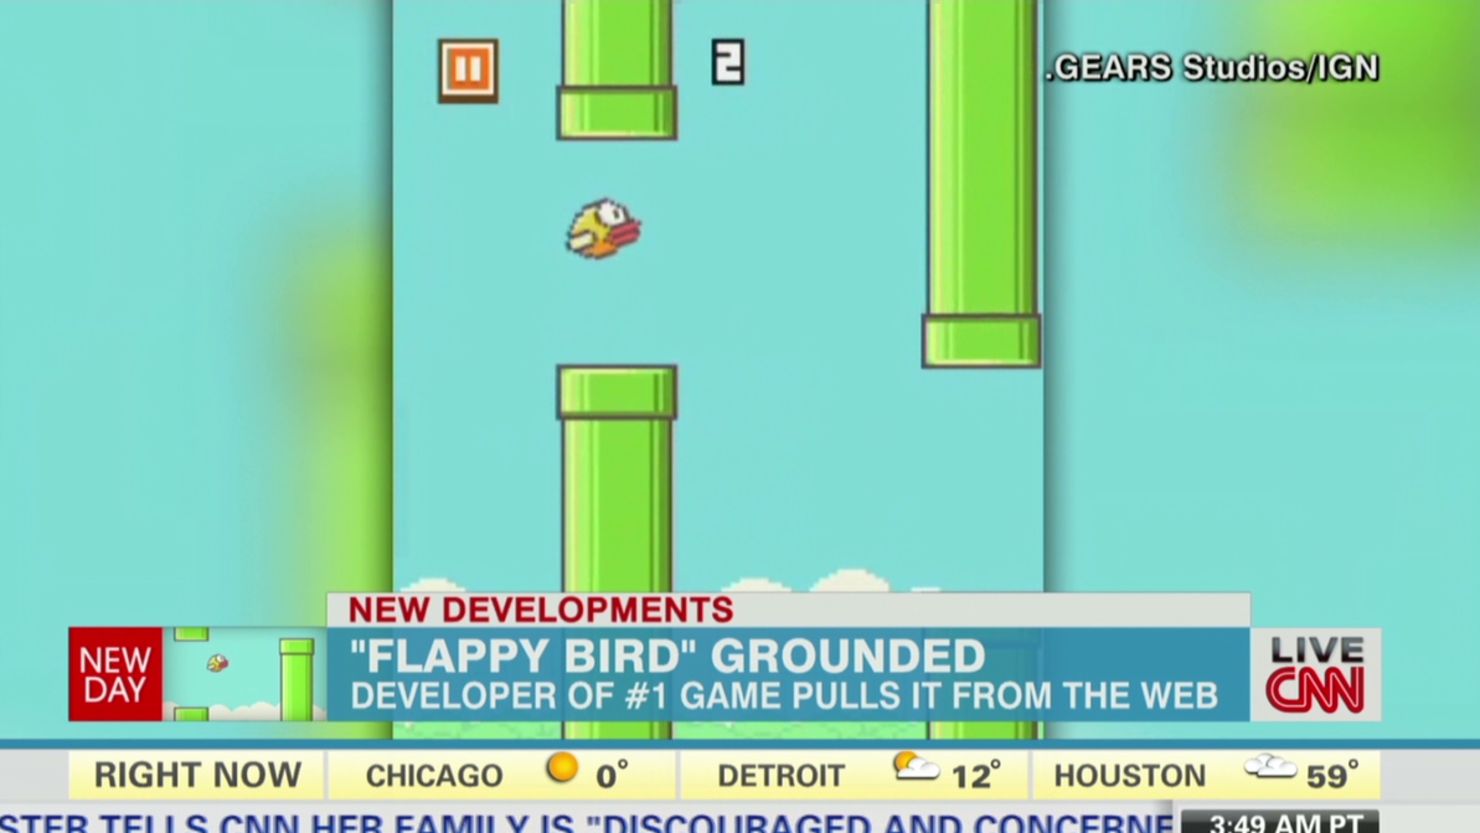 Flappy Bird Is Most Searched-for Game, According to Google